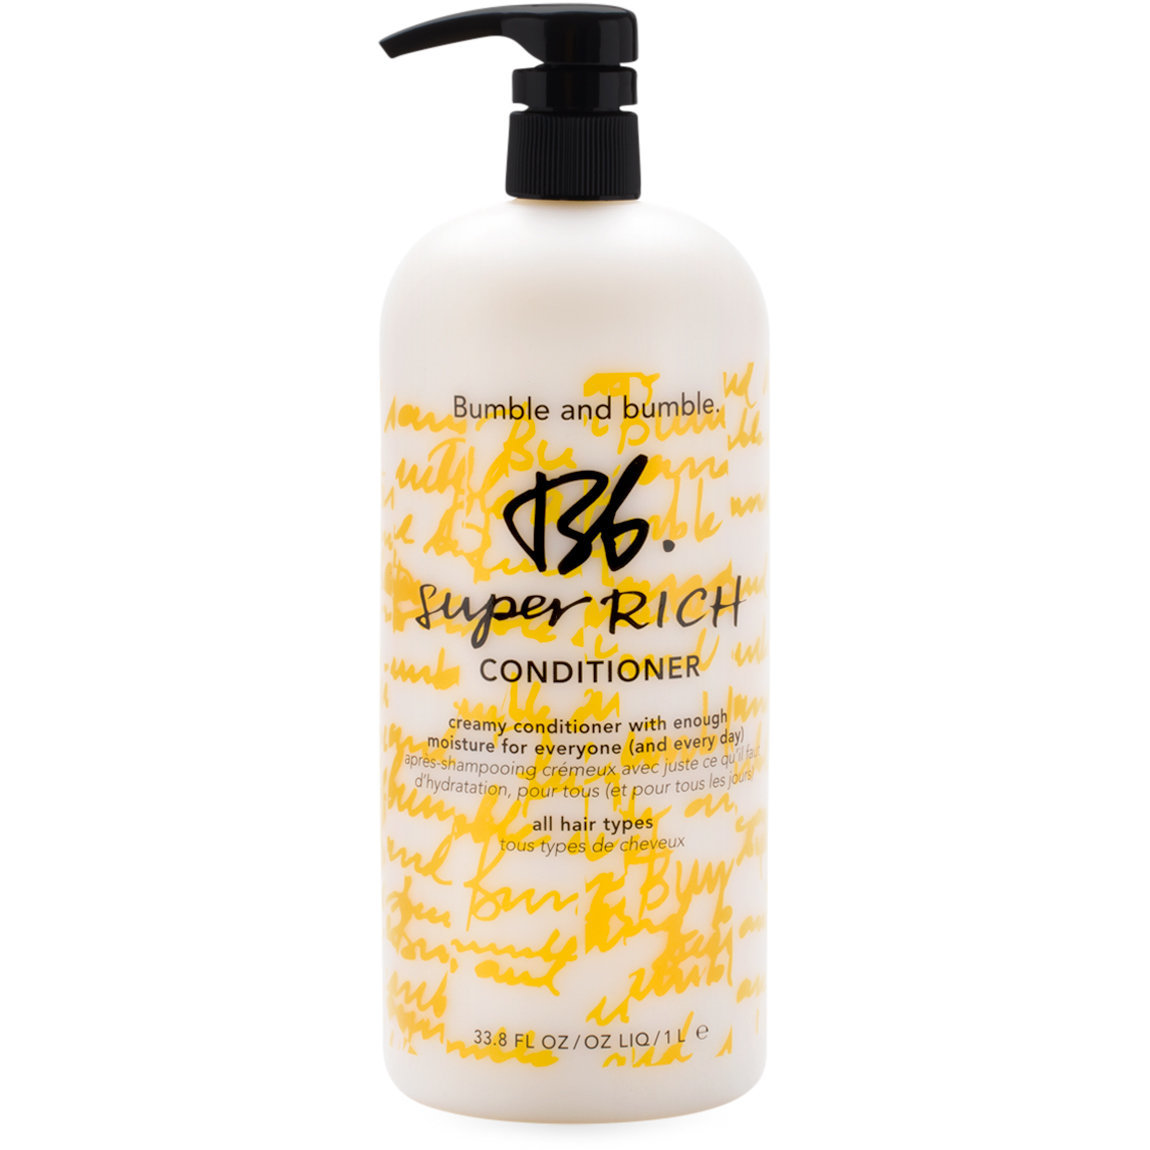 Bumble and bumble. Super Rich Conditioner 1 L alternative view 1 - product swatch.